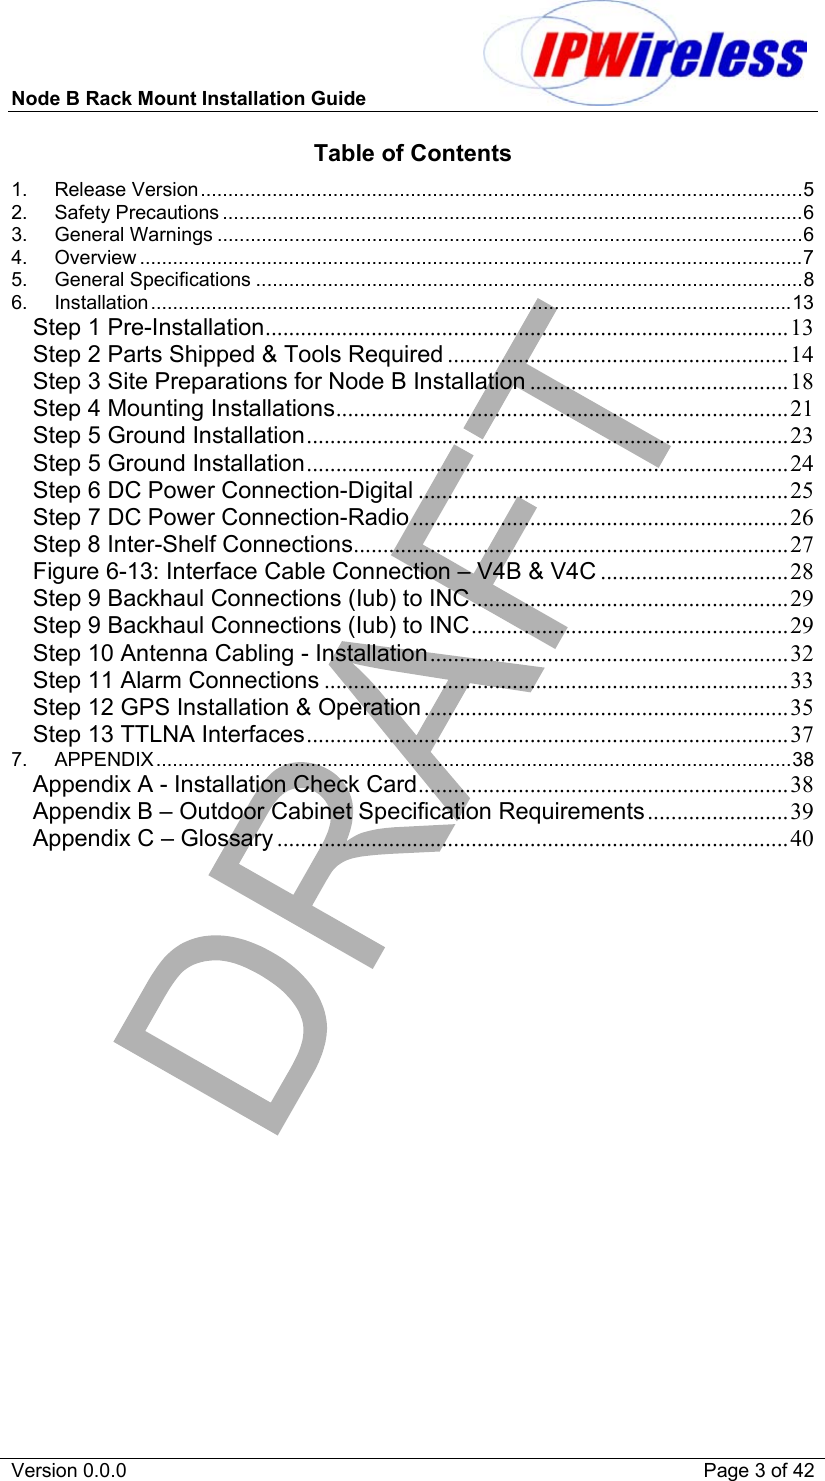 Node B Rack Mount Installation Guide                           Version 0.0.0    Page 3 of 42 Table of Contents 1. Release Version.............................................................................................................5 2. Safety Precautions .........................................................................................................6 3. General Warnings ..........................................................................................................6 4. Overview ........................................................................................................................7 5. General Specifications ...................................................................................................8 6. Installation....................................................................................................................13 Step 1 Pre-Installation......................................................................................... 13 Step 2 Parts Shipped &amp; Tools Required ..........................................................14 Step 3 Site Preparations for Node B Installation ............................................18 Step 4 Mounting Installations............................................................................. 21 Step 5 Ground Installation.................................................................................. 23 Step 5 Ground Installation.................................................................................. 24 Step 6 DC Power Connection-Digital ............................................................... 25 Step 7 DC Power Connection-Radio ................................................................ 26 Step 8 Inter-Shelf Connections.......................................................................... 27 Figure 6-13: Interface Cable Connection – V4B &amp; V4C ................................ 28 Step 9 Backhaul Connections (Iub) to INC...................................................... 29 Step 9 Backhaul Connections (Iub) to INC...................................................... 29 Step 10 Antenna Cabling - Installation.............................................................32 Step 11 Alarm Connections ...............................................................................33 Step 12 GPS Installation &amp; Operation..............................................................35 Step 13 TTLNA Interfaces.................................................................................. 37 7. APPENDIX...................................................................................................................38 Appendix A - Installation Check Card............................................................... 38 Appendix B – Outdoor Cabinet Specification Requirements........................39 Appendix C – Glossary ....................................................................................... 40  